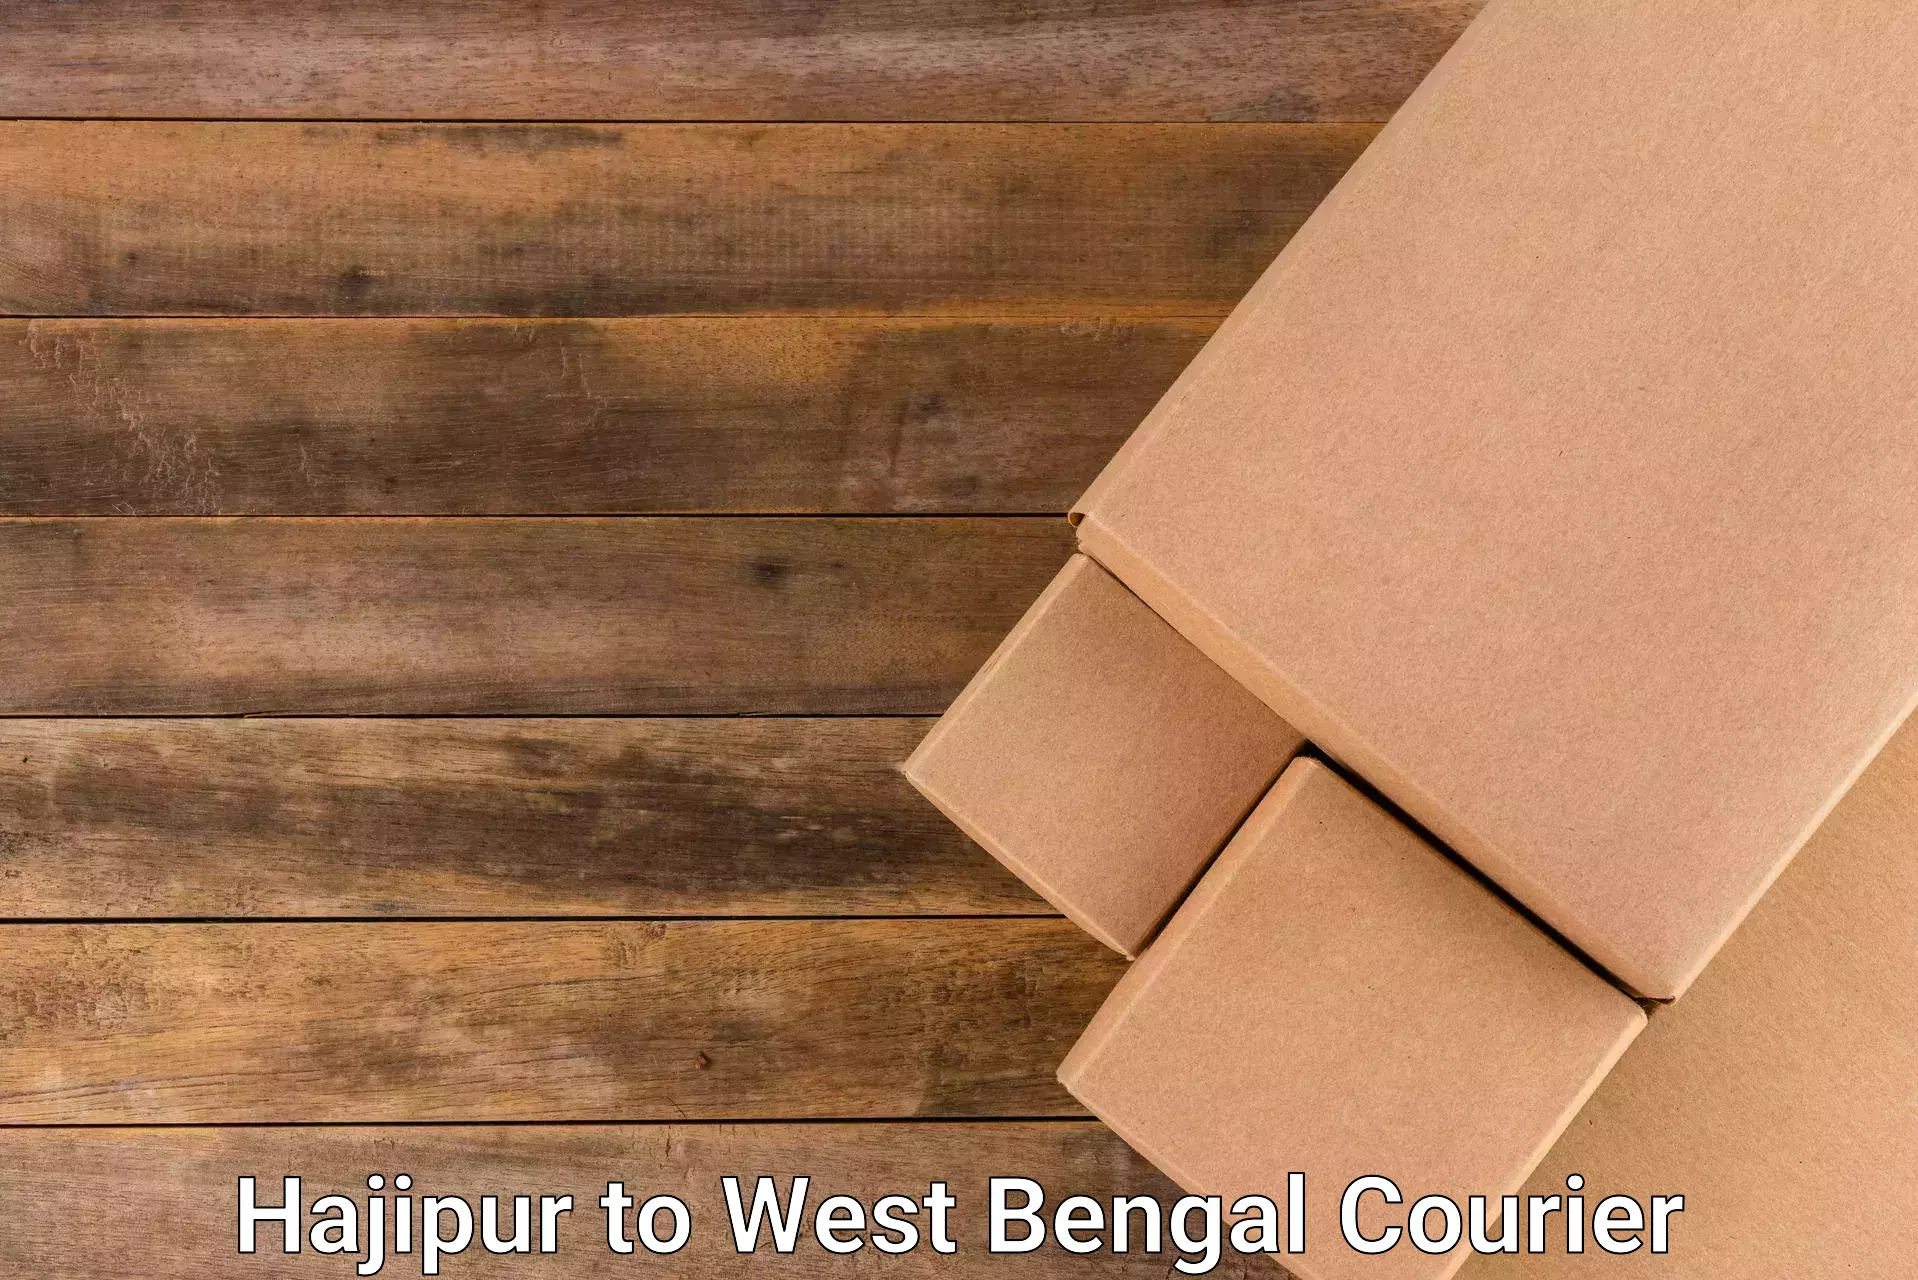 Reliable shipping partners Hajipur to West Bengal